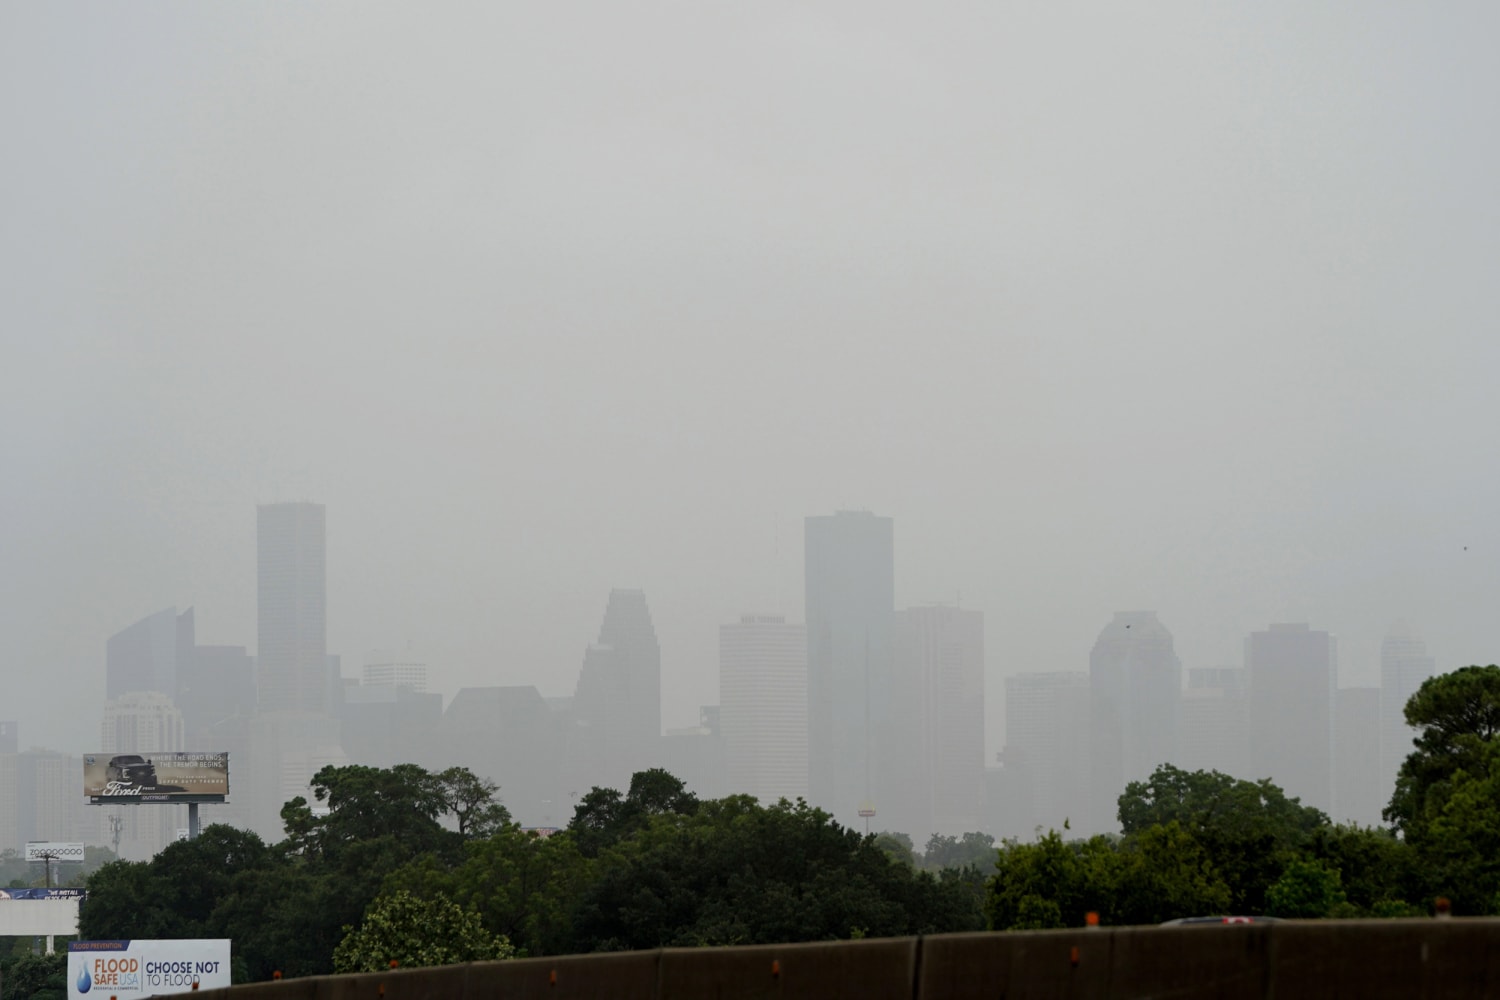 Have you seen the haze? Saharan Dust arrives in Central Florida